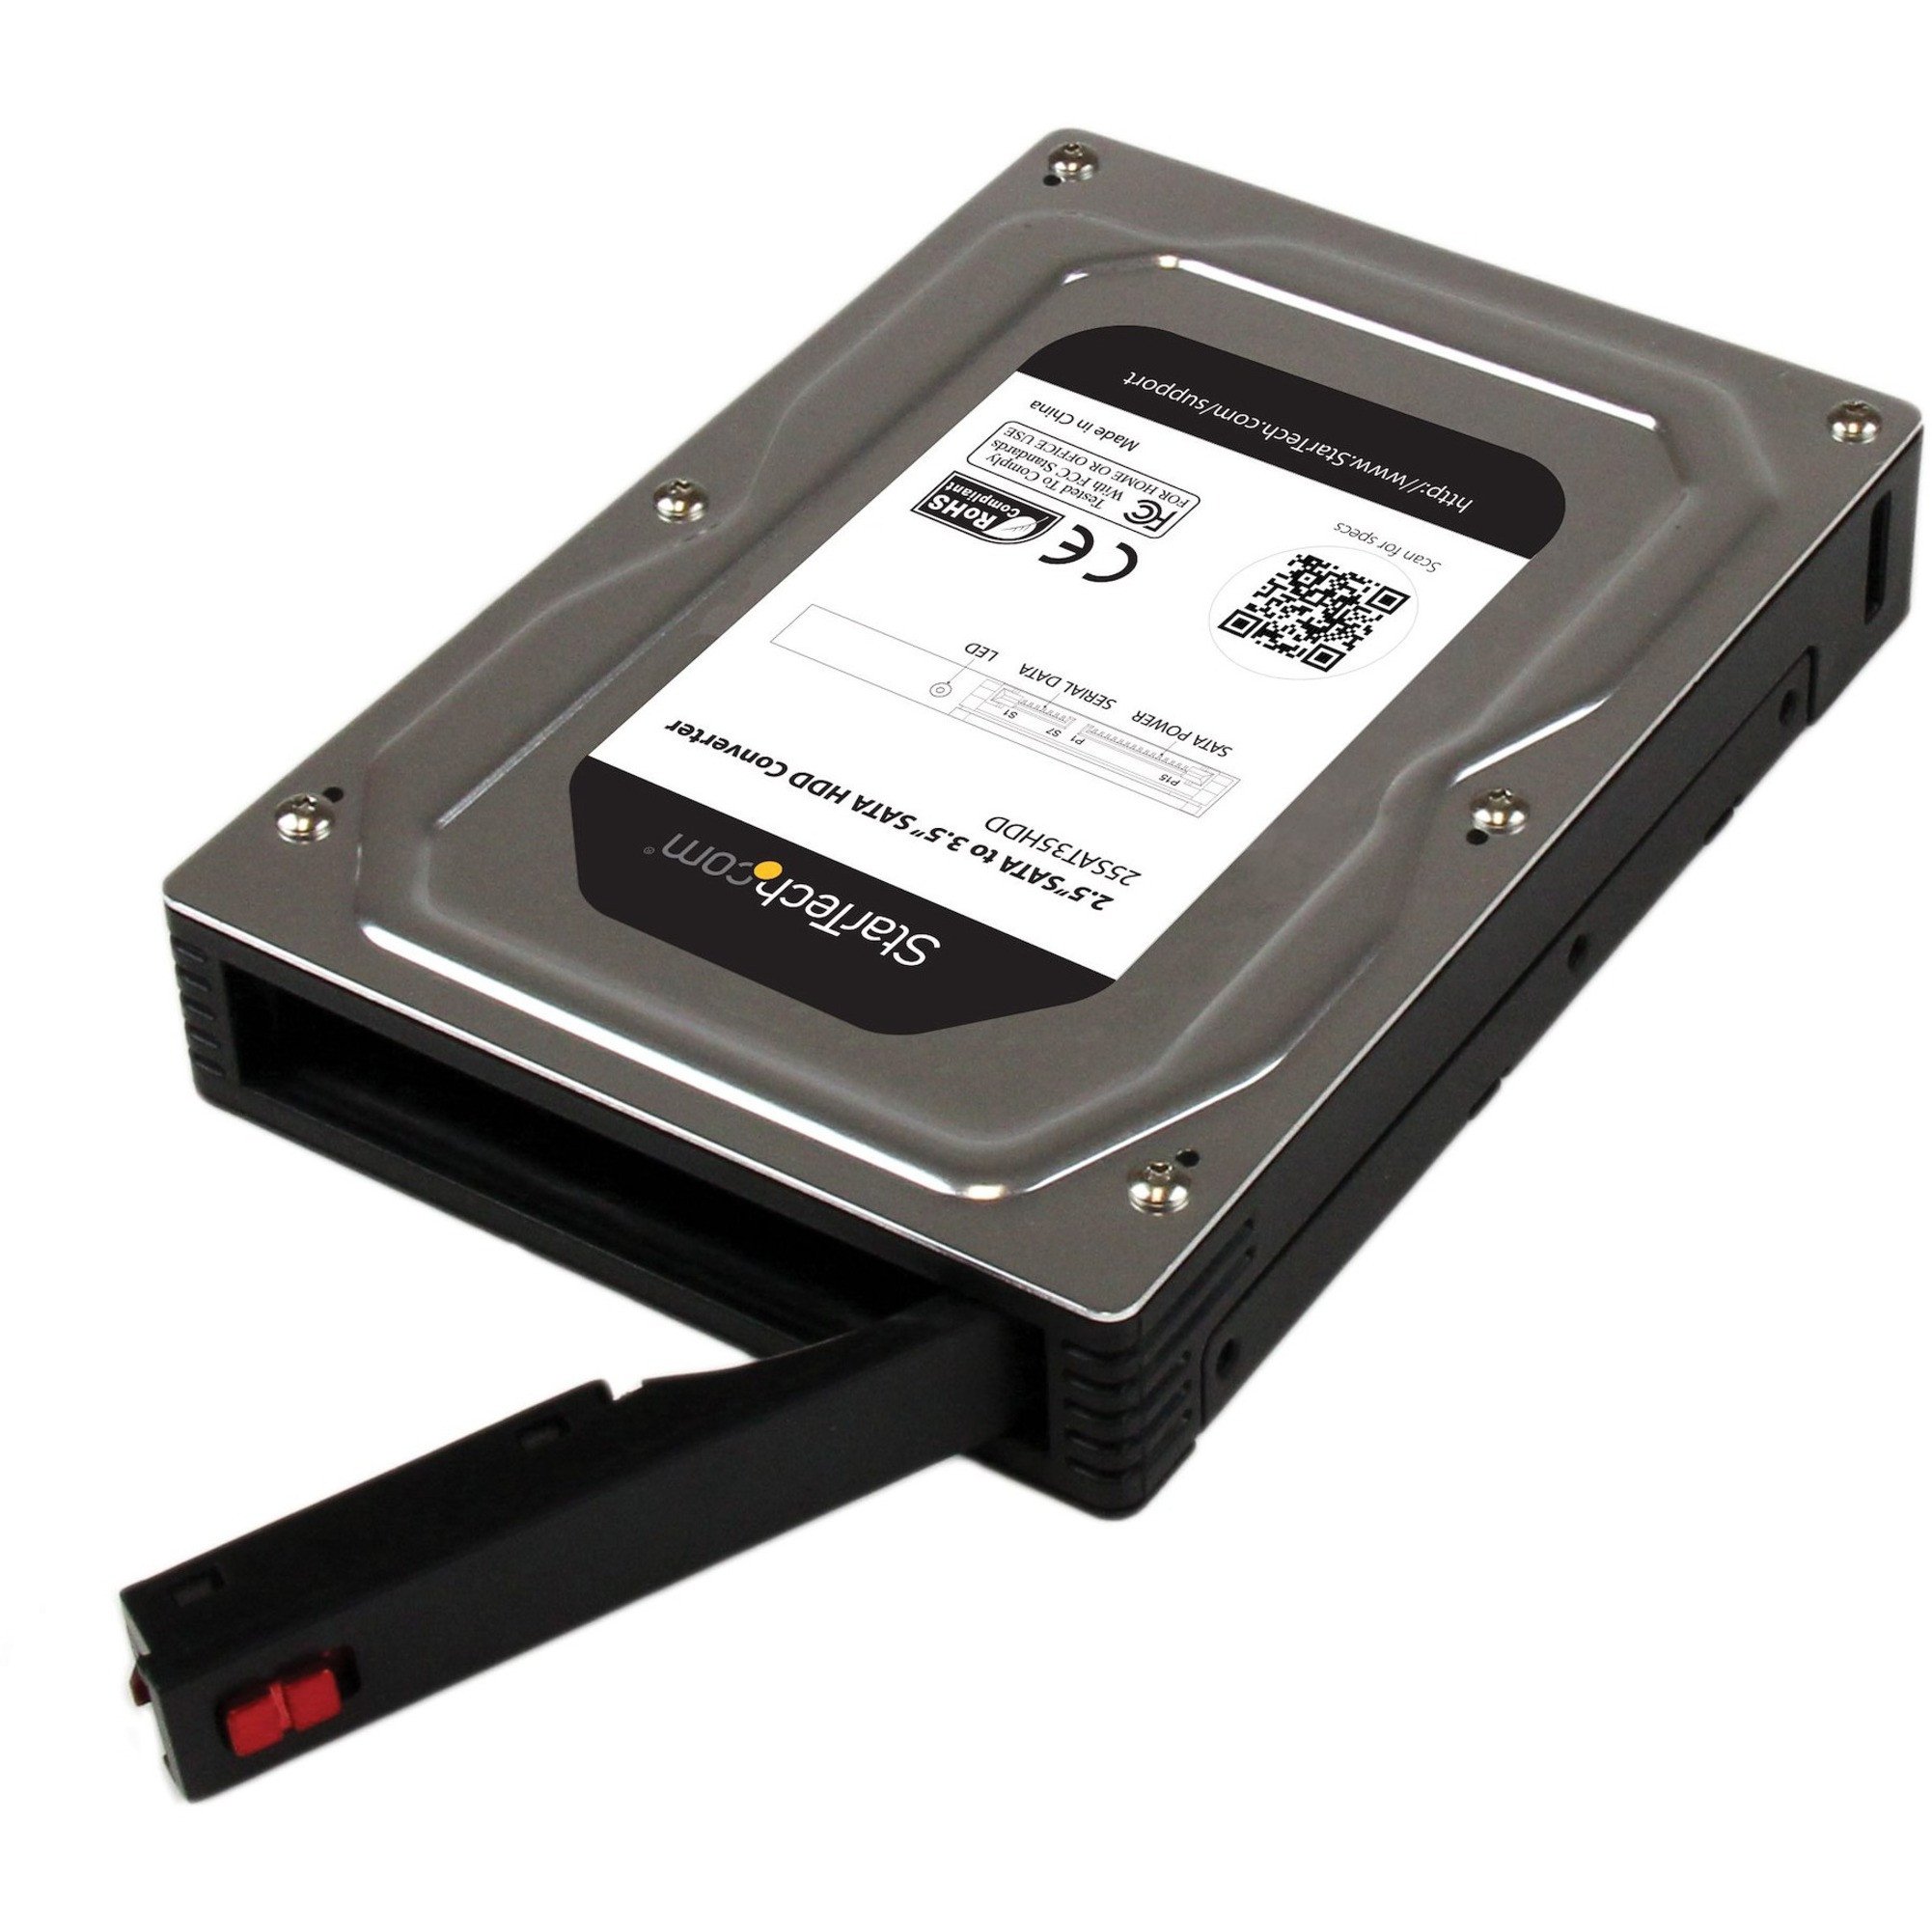 .com 2.5" to 3.5" SATA Hard Adapter Enclosure with SSD / HDD up to 12.5mmTurn a 2.5" SATA HDD/SSD into a 3.5... 25SAT35HDD - Corporate Armor